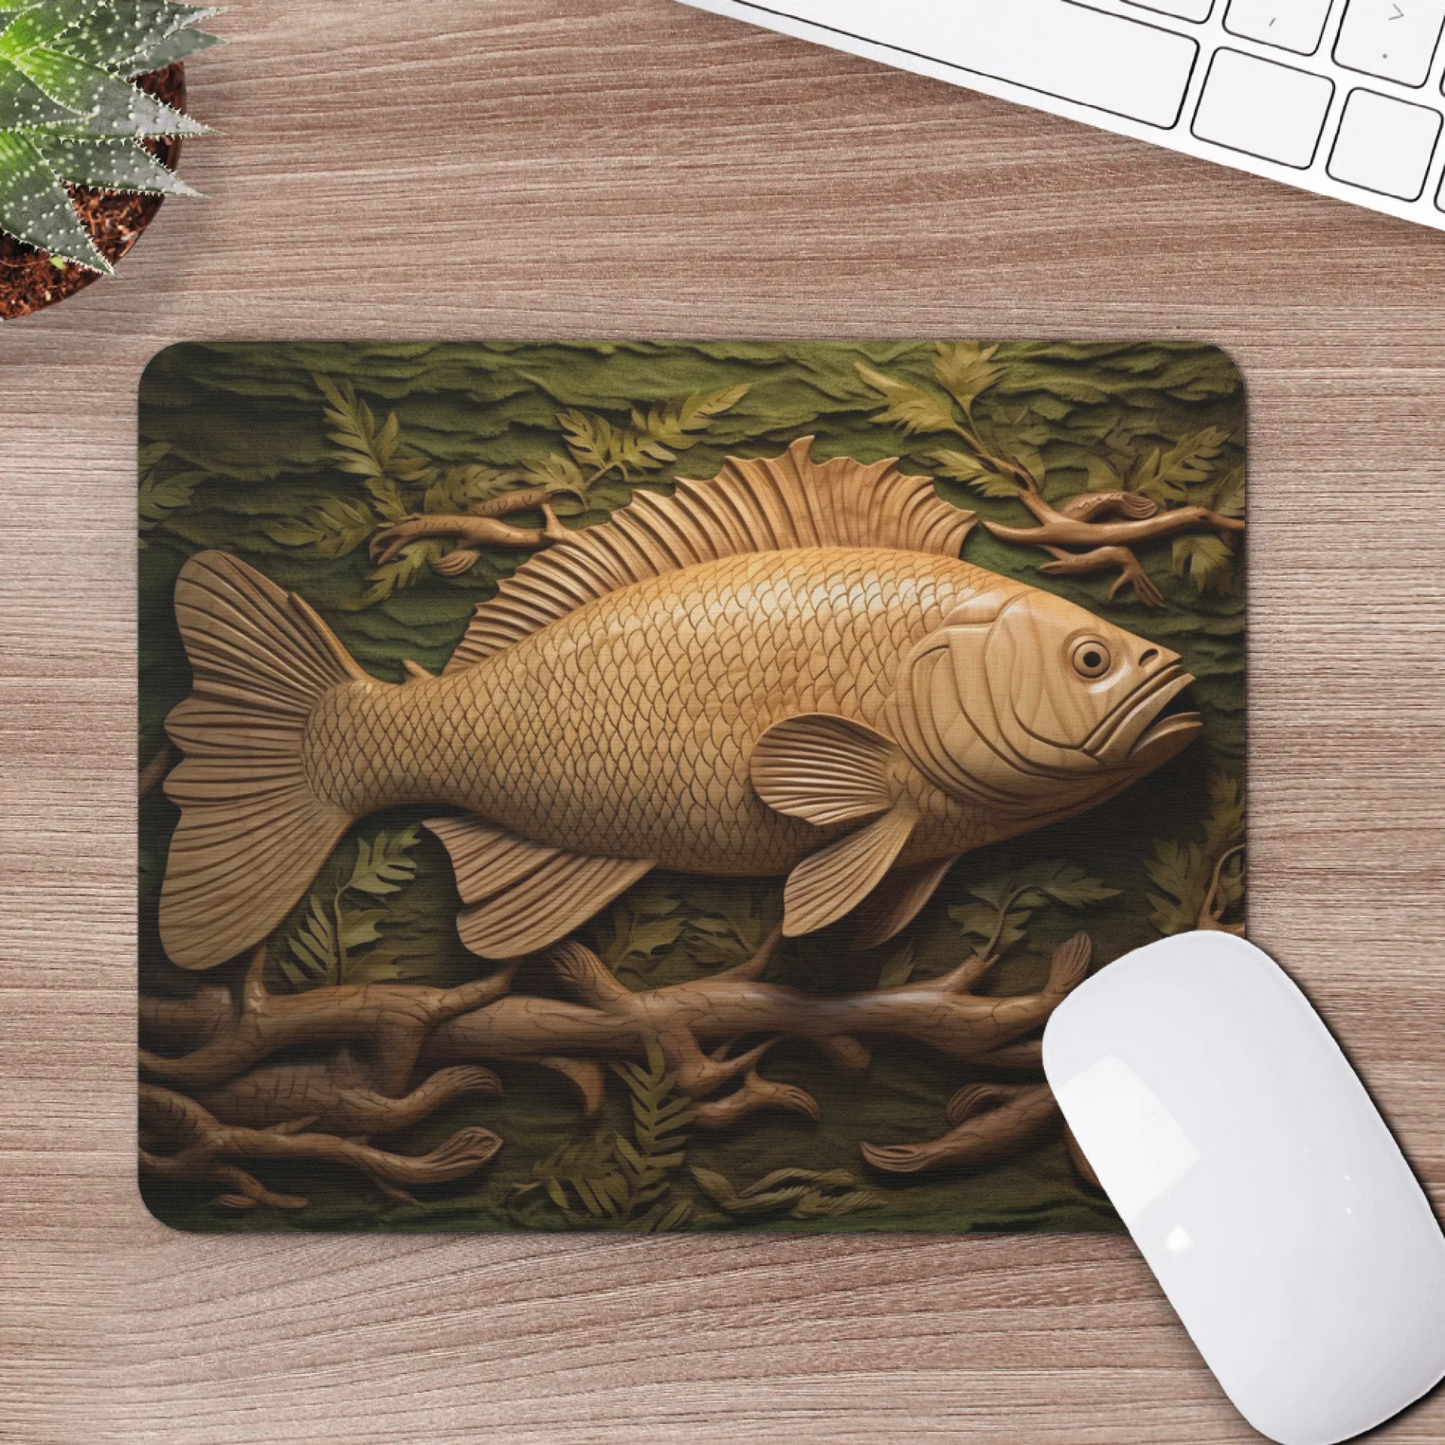 Square Rubber Mouse Mat Pad with Fish Print - High Quality, Anti-Slip, Washable, Goodies N Stuff